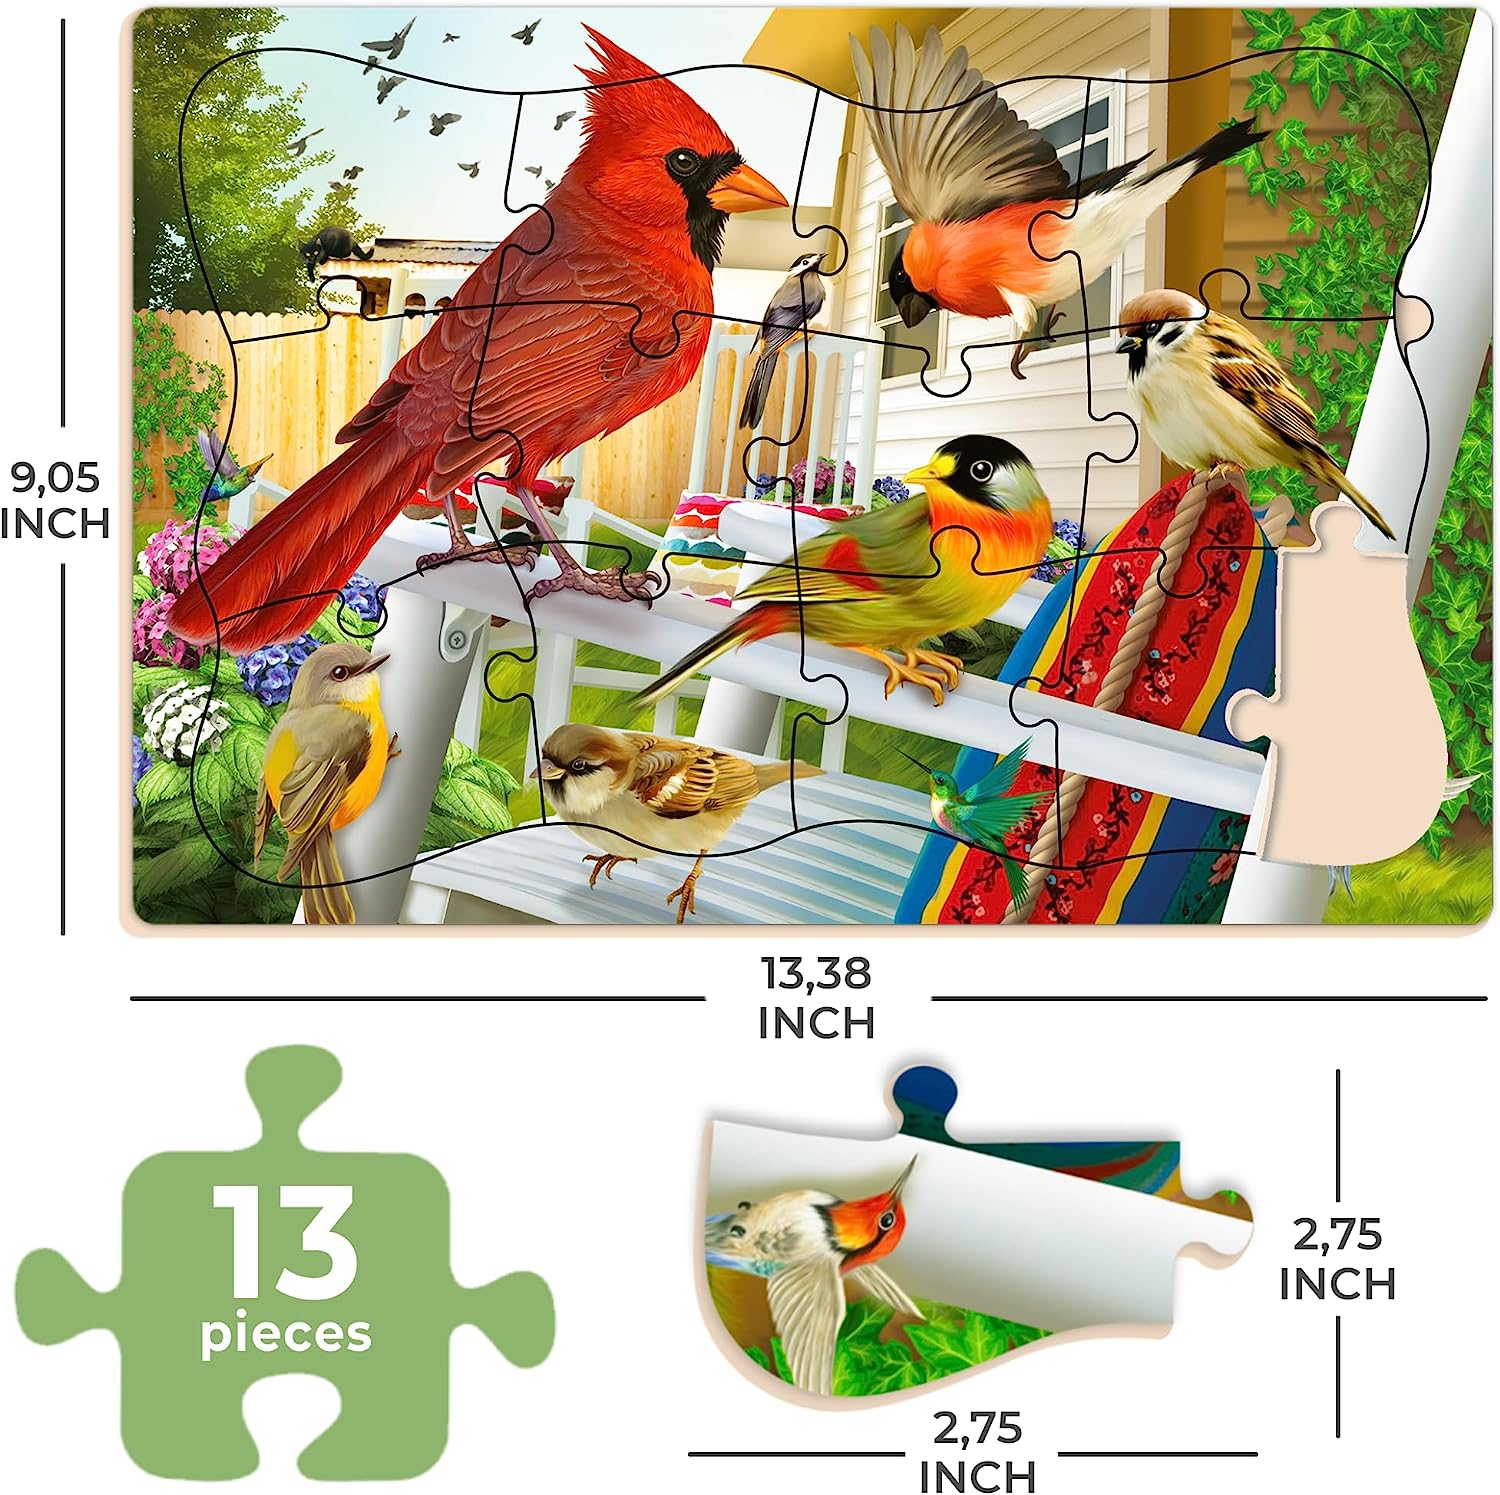 13 Piece Dementia Puzzles for Elderly - Large Piece Activities Products for Seniors by - 3 Alzheimers Jigsaw Puzzle Games for Adults with Birds and Cats - Cognitive Gifts Toys for Men and Women